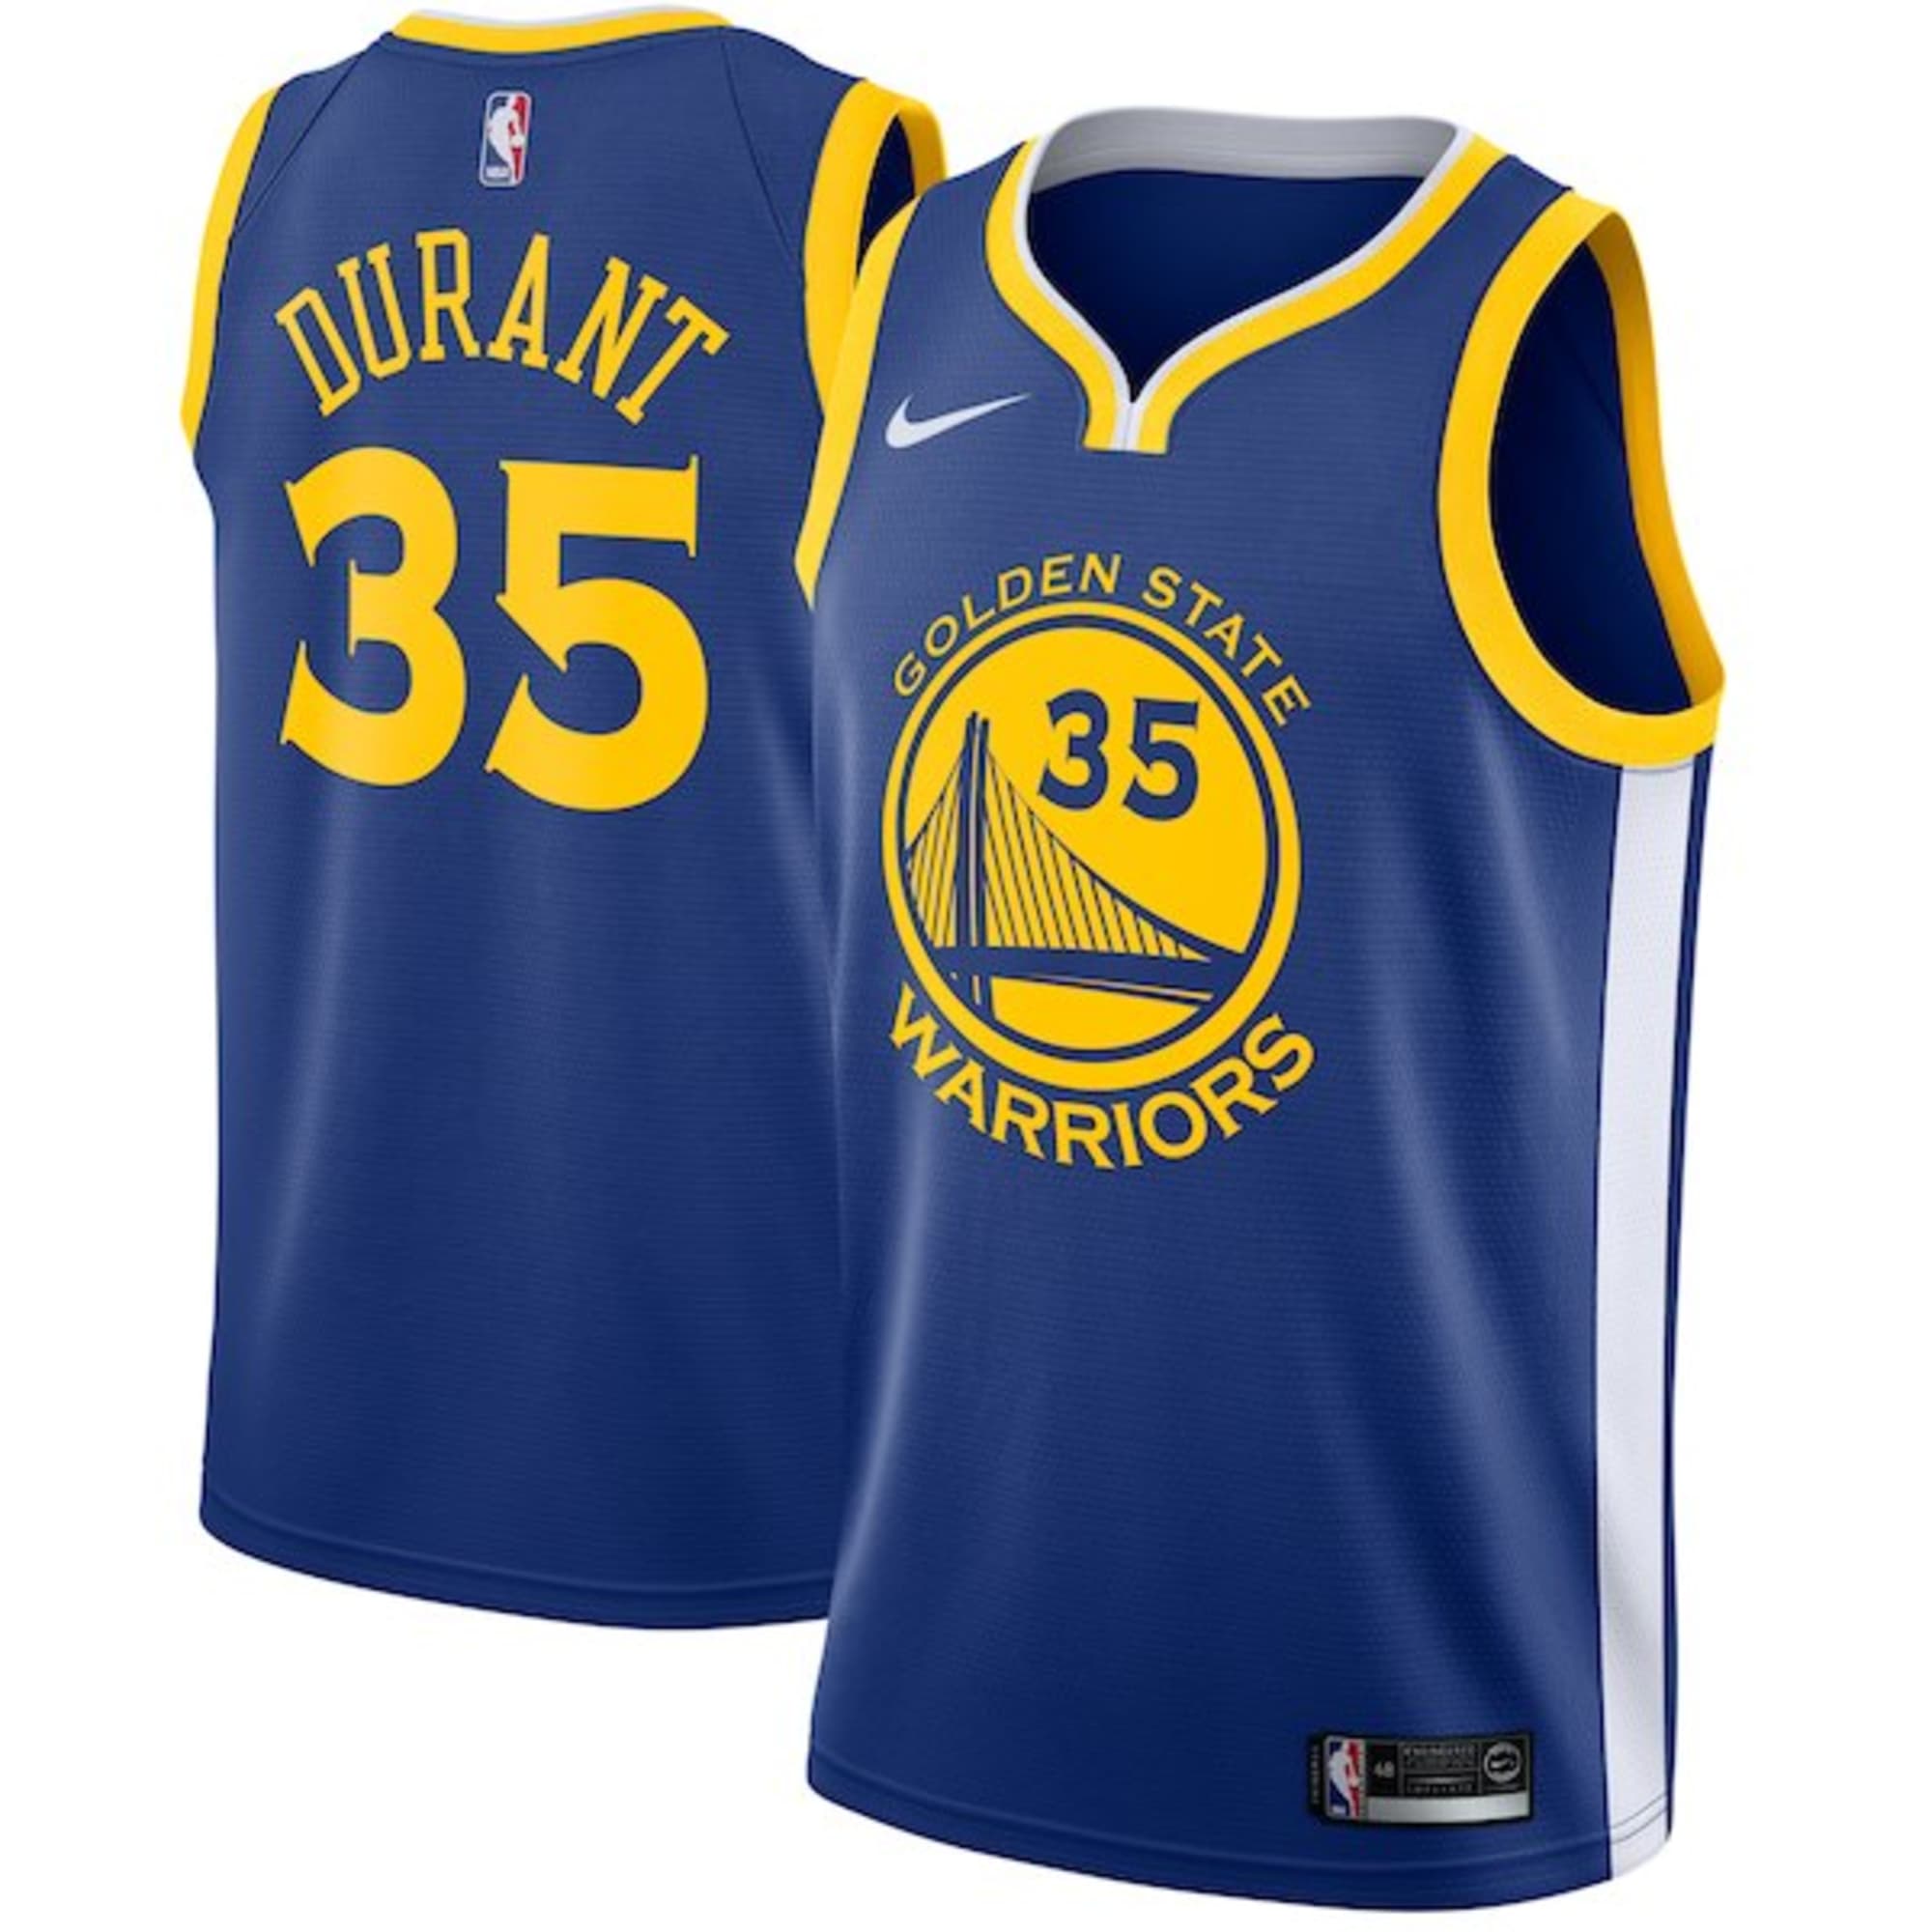 The Sims Resource - Golden State Warriors jerseys (Spa day required)